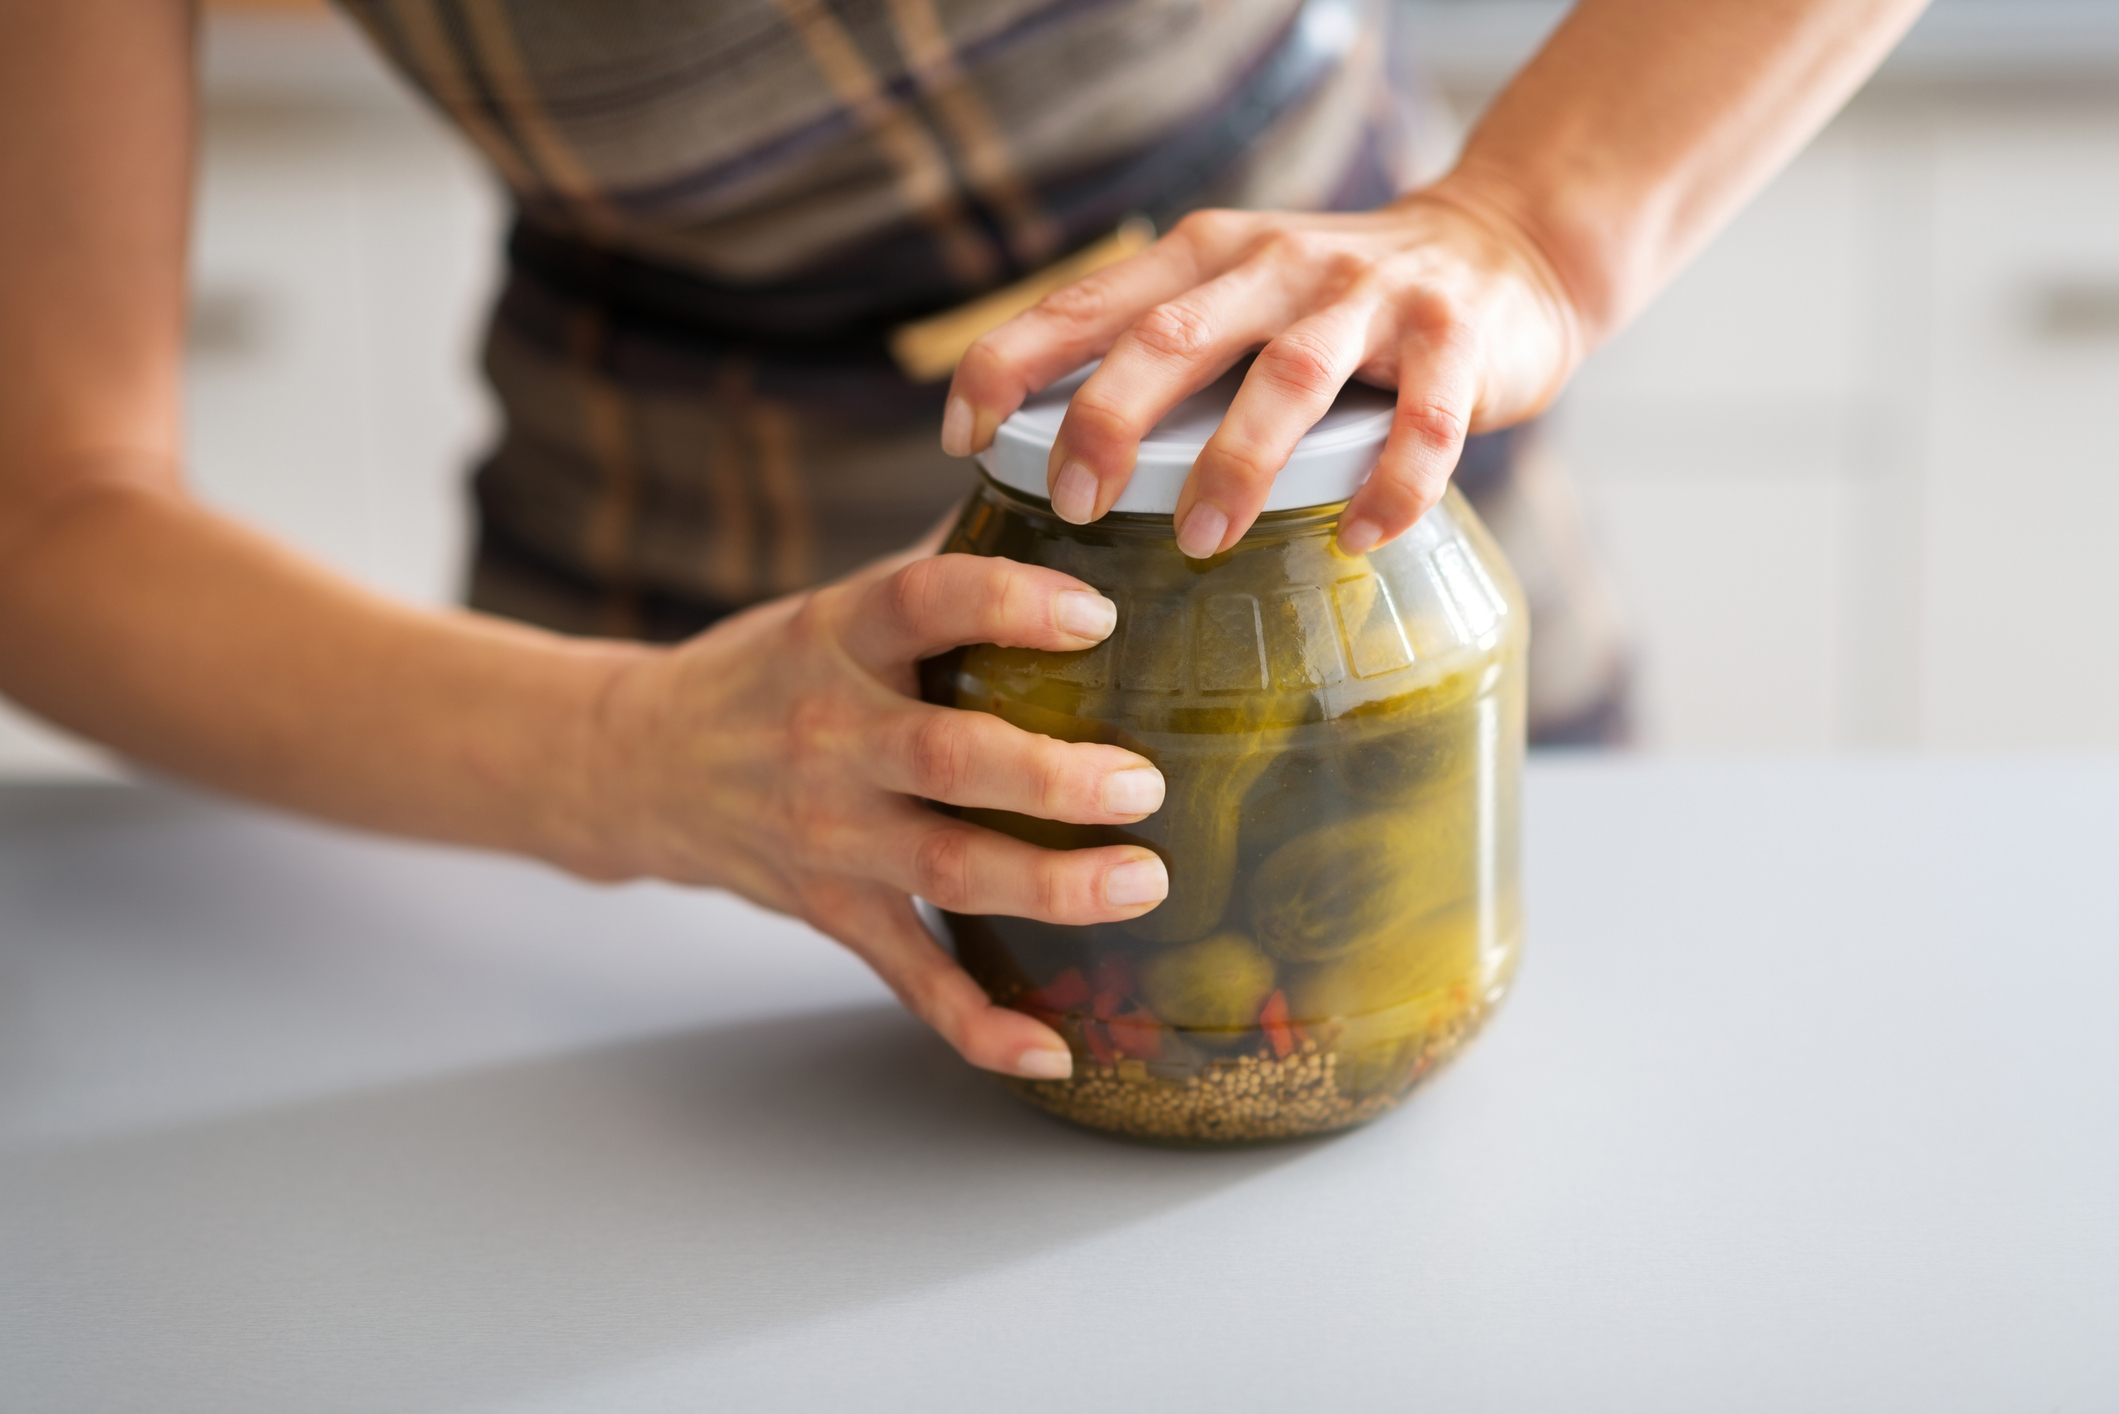 Stock photo of woman's hands opening jar of pickled cucumbers